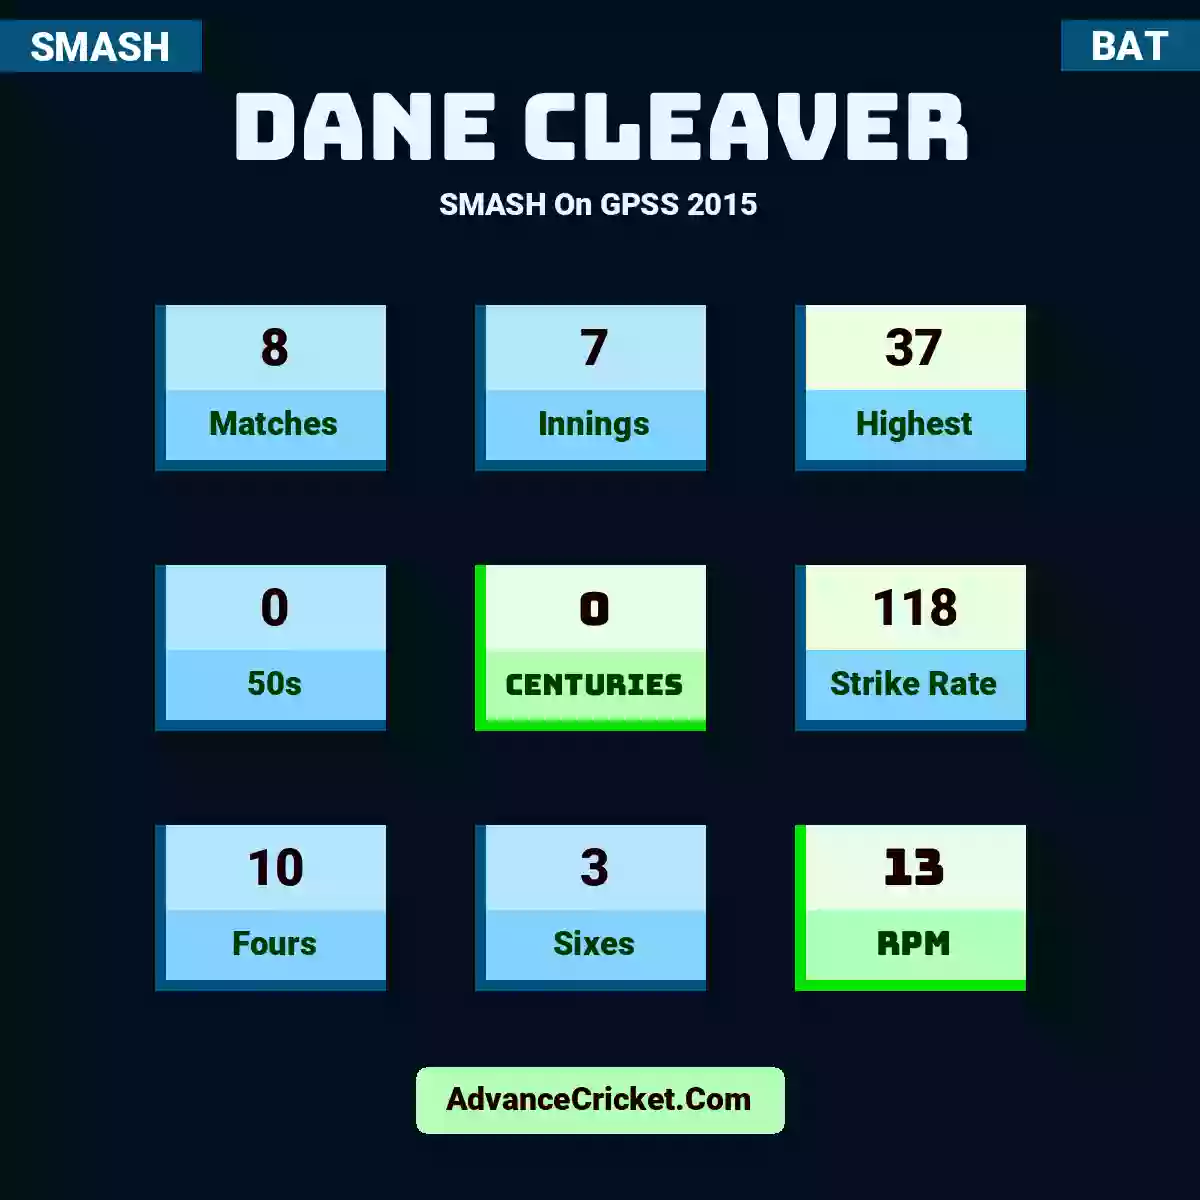 Dane Cleaver SMASH  On GPSS 2015, Dane Cleaver played 8 matches, scored 37 runs as highest, 0 half-centuries, and 0 centuries, with a strike rate of 118. D.Cleaver hit 10 fours and 3 sixes, with an RPM of 13.